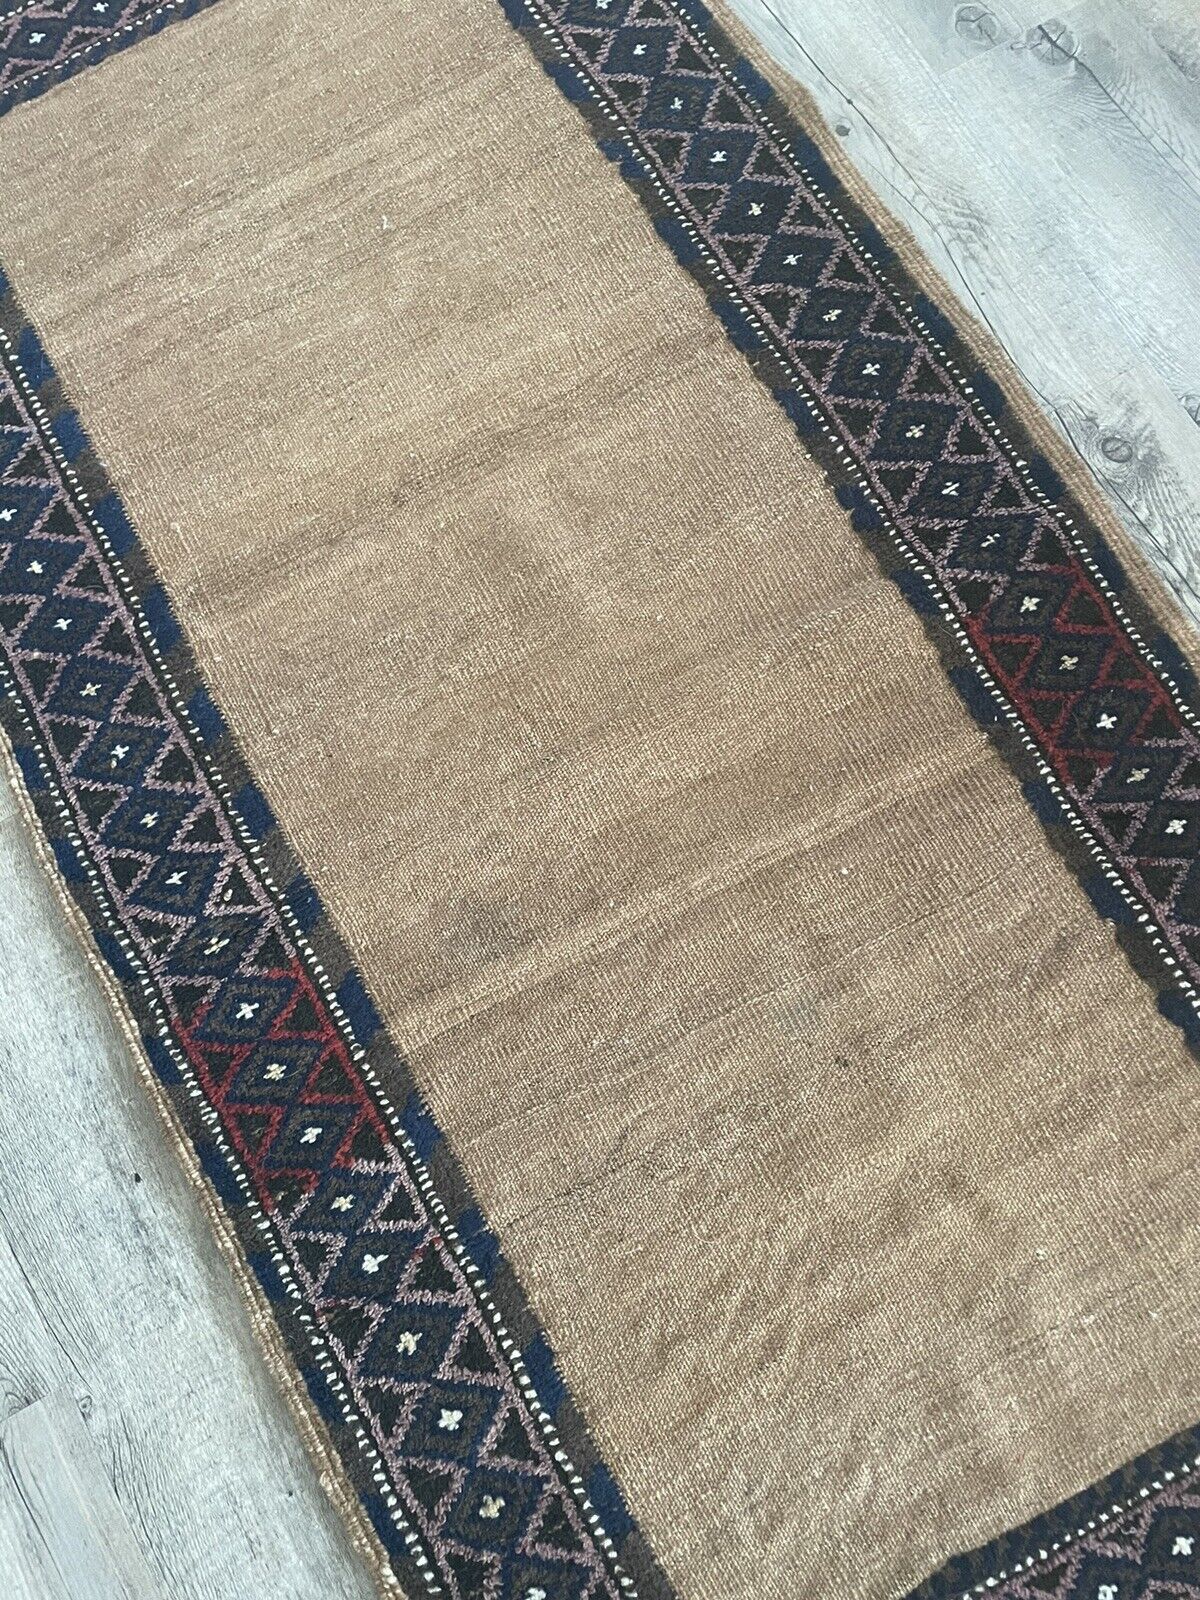 Close-up of texture on Handmade Antique Afghan Baluch Collectible Rug - Detailed view highlighting the texture of the rug, created through a combination of pile and kilim weaving techniques, adding depth and visual interest.